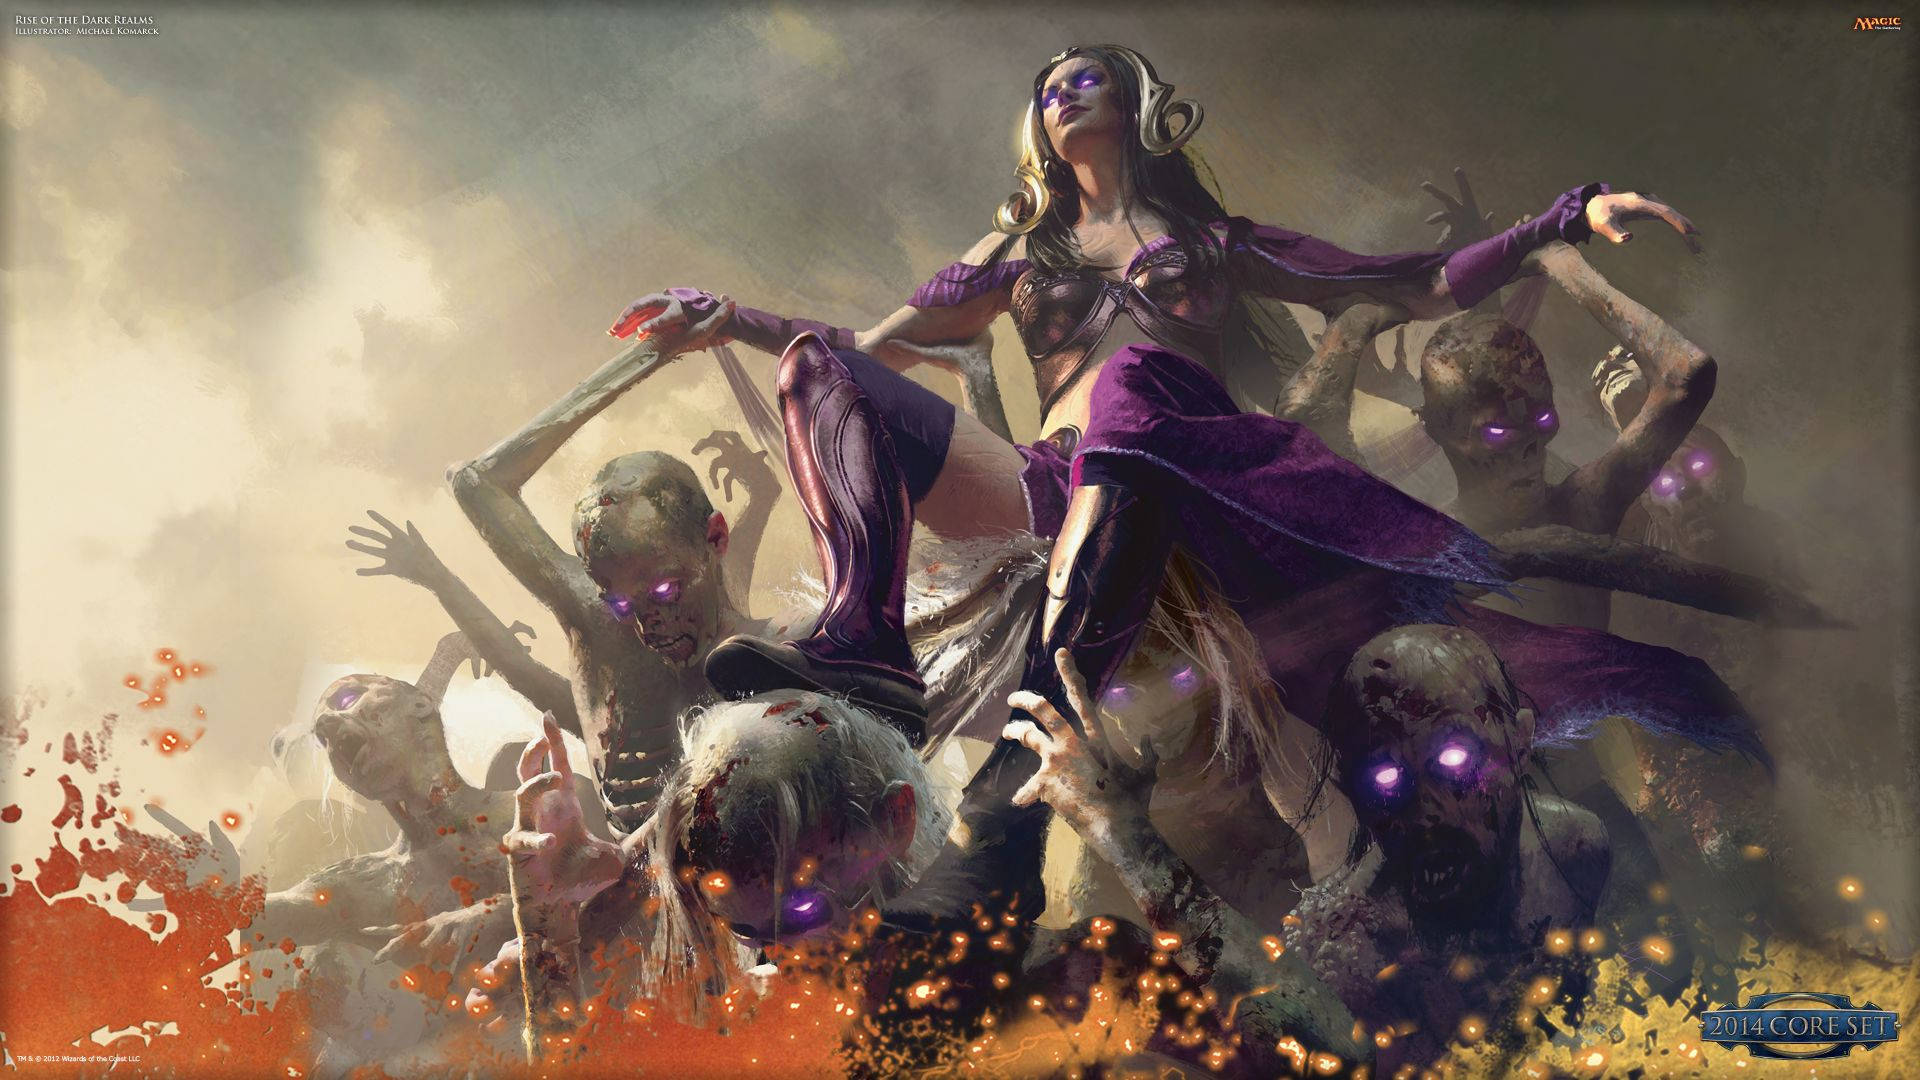 SEO  "Let Darkness Envelop You in Magic The Gathering: Rise of the Dark Realms" Wallpaper